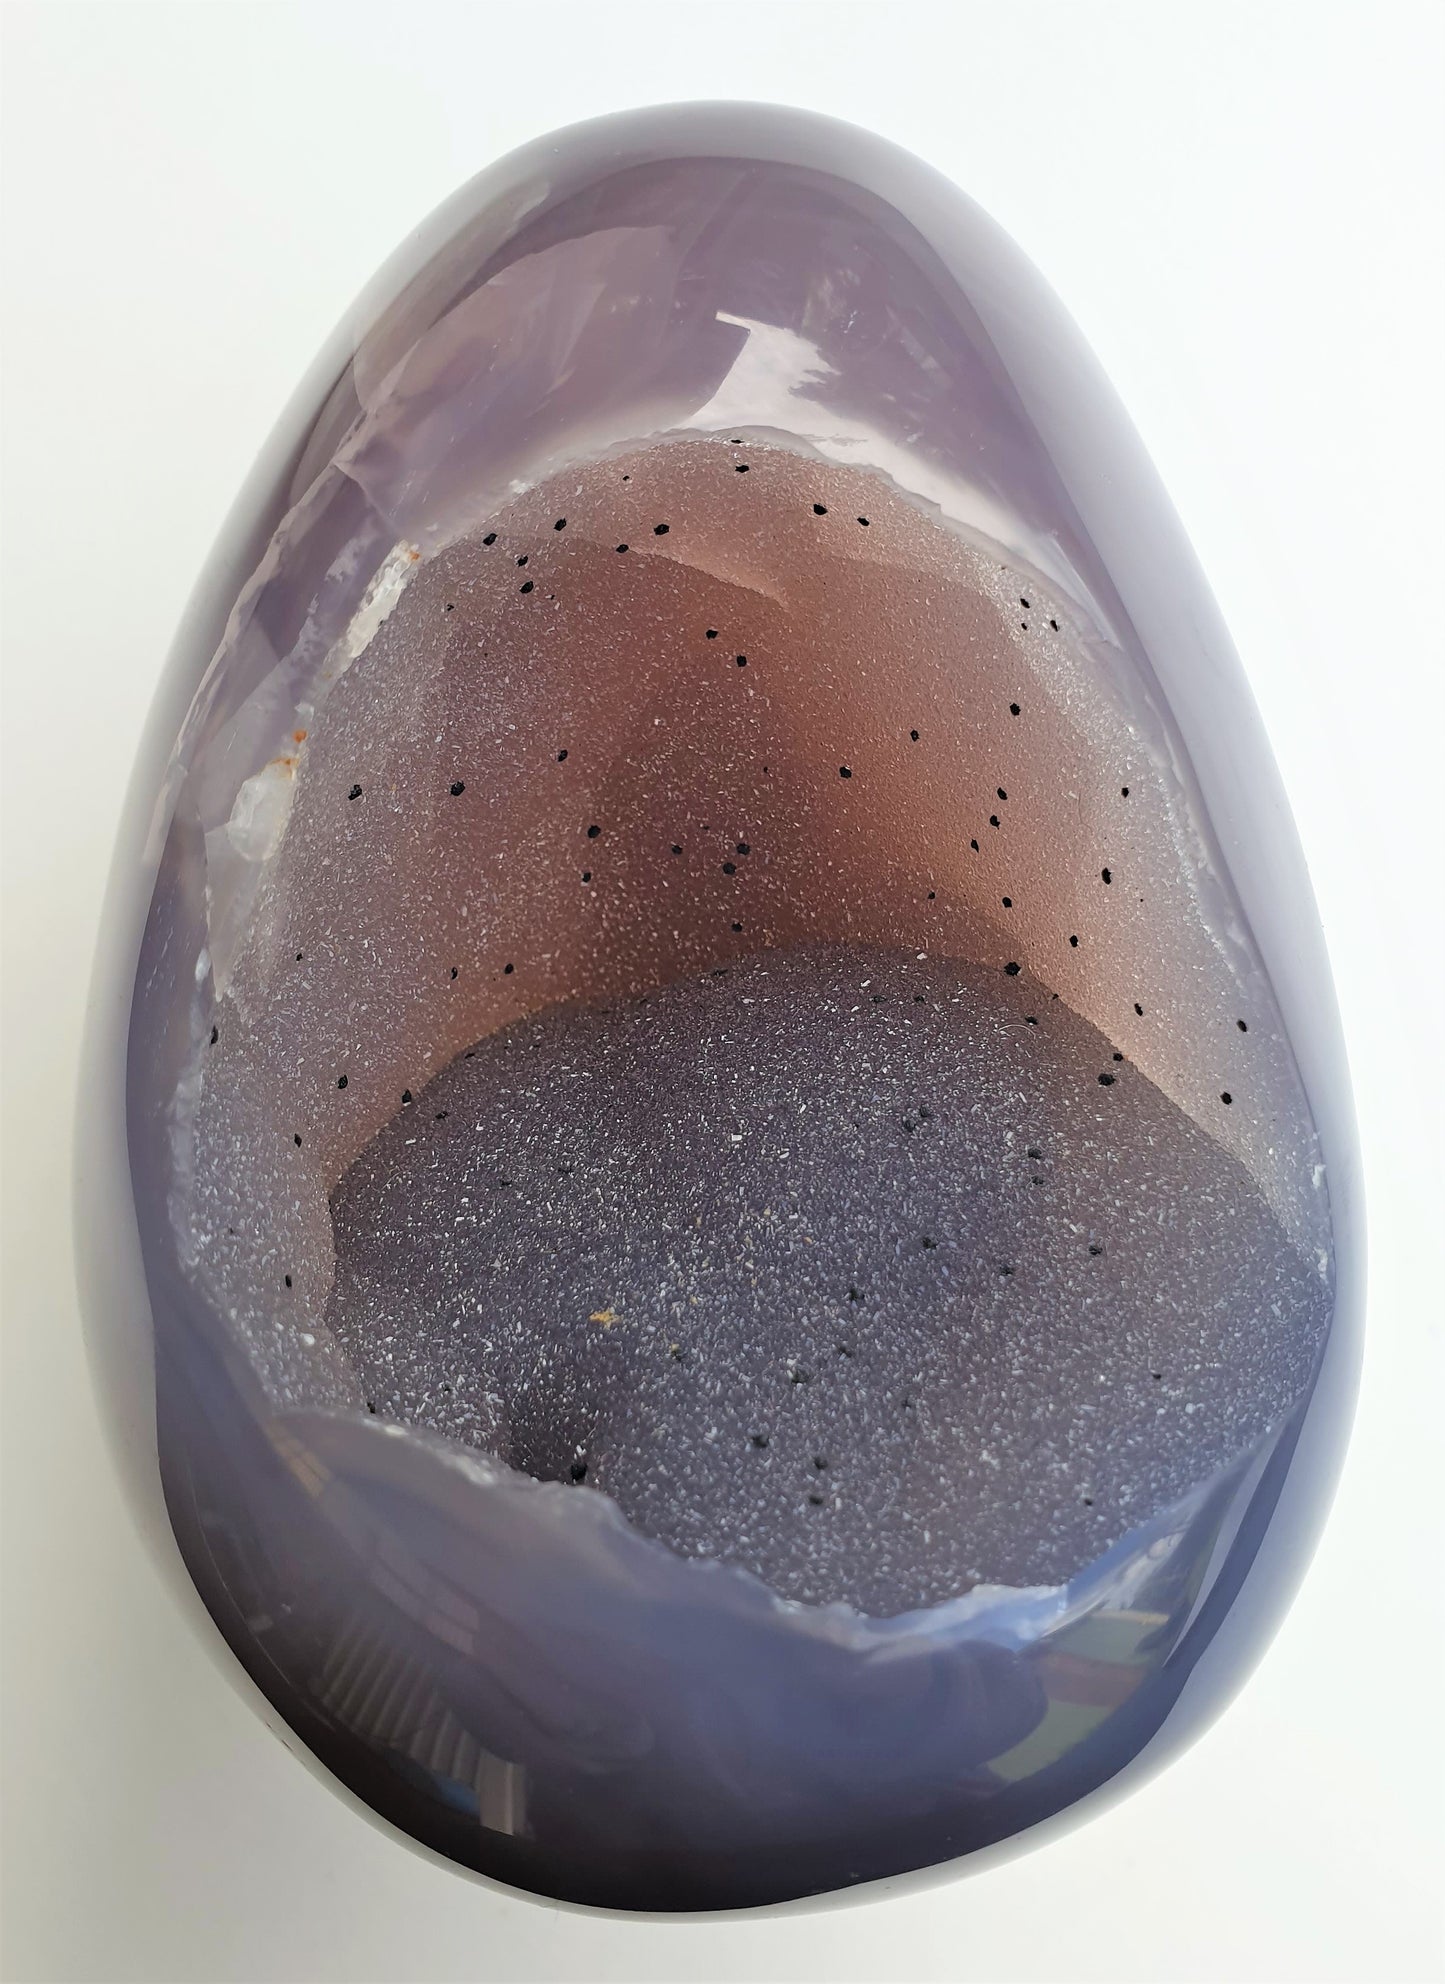 view of the whole agate egg druzy cave on the agate egg. kiwi fruit looking - very sparkly, black spots throughout and has a gorgeous light peach / blue, grey colouring. outside is smooth, polished and has a purple colour to it.